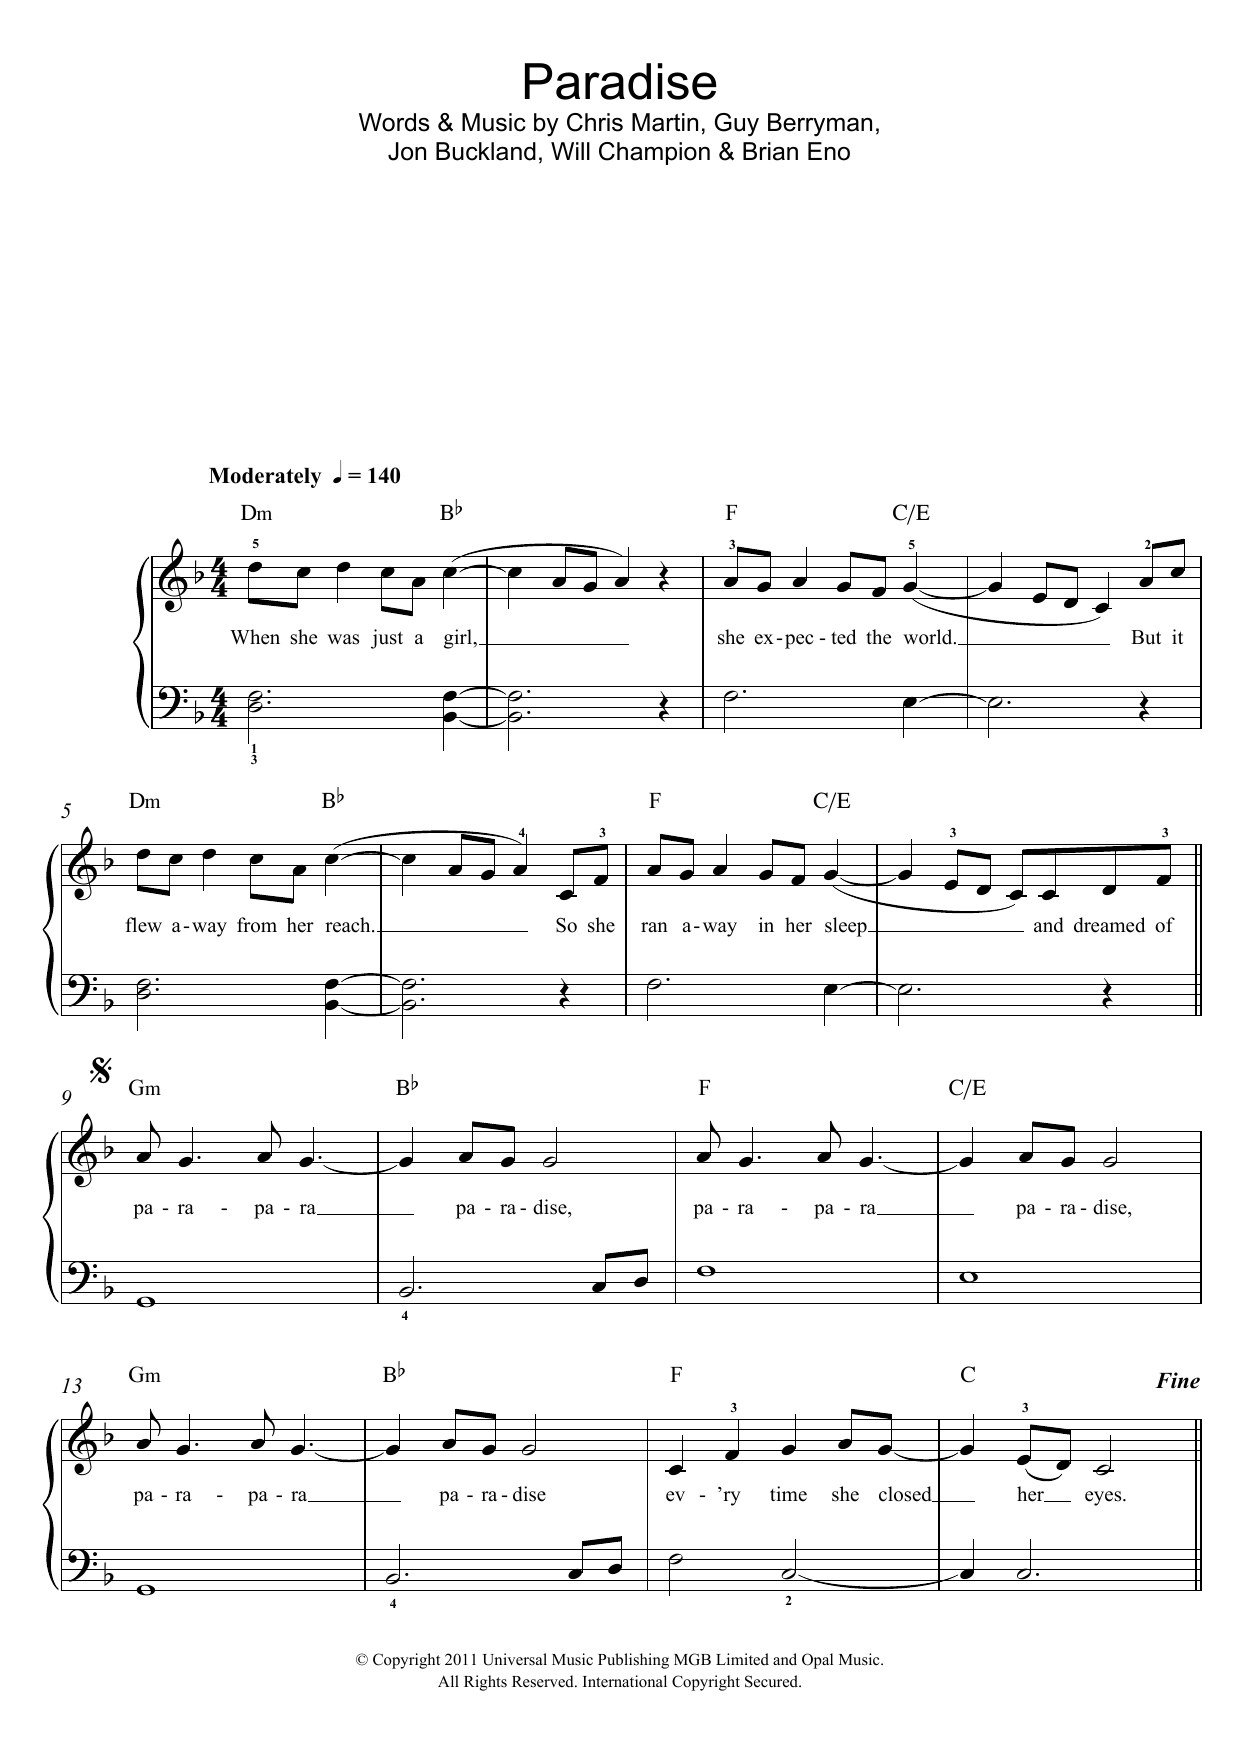 coldplay paradise sheet music easy